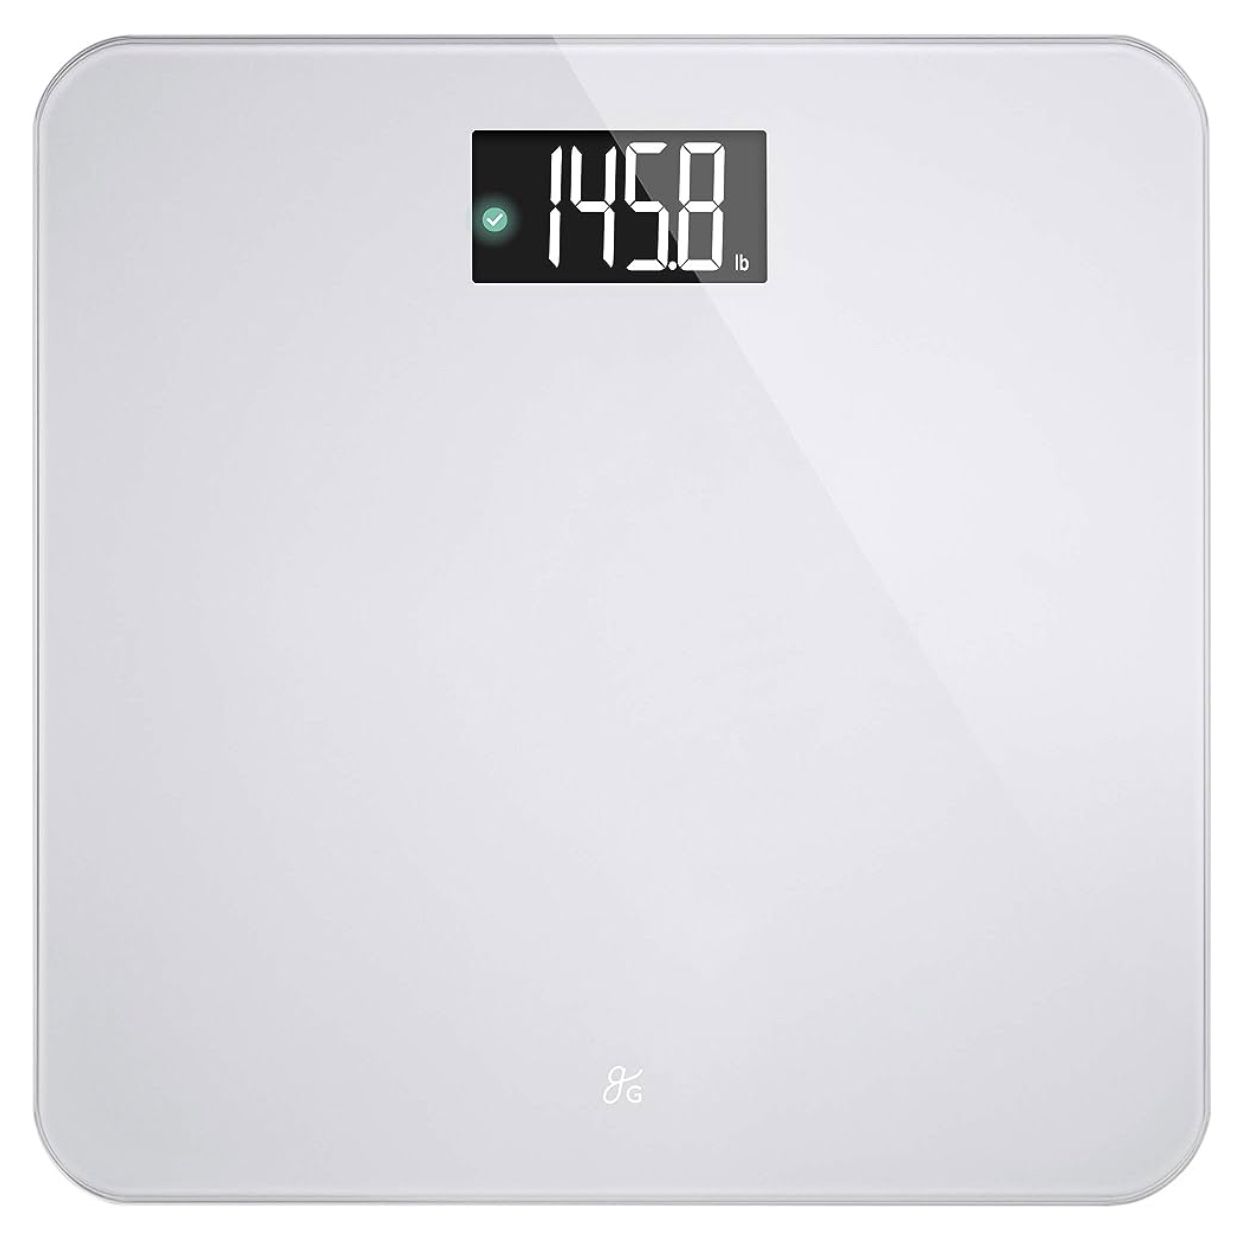 Greater Goods AccuCheck Digital Bathroom Scale For Body Weight BEST OFFER